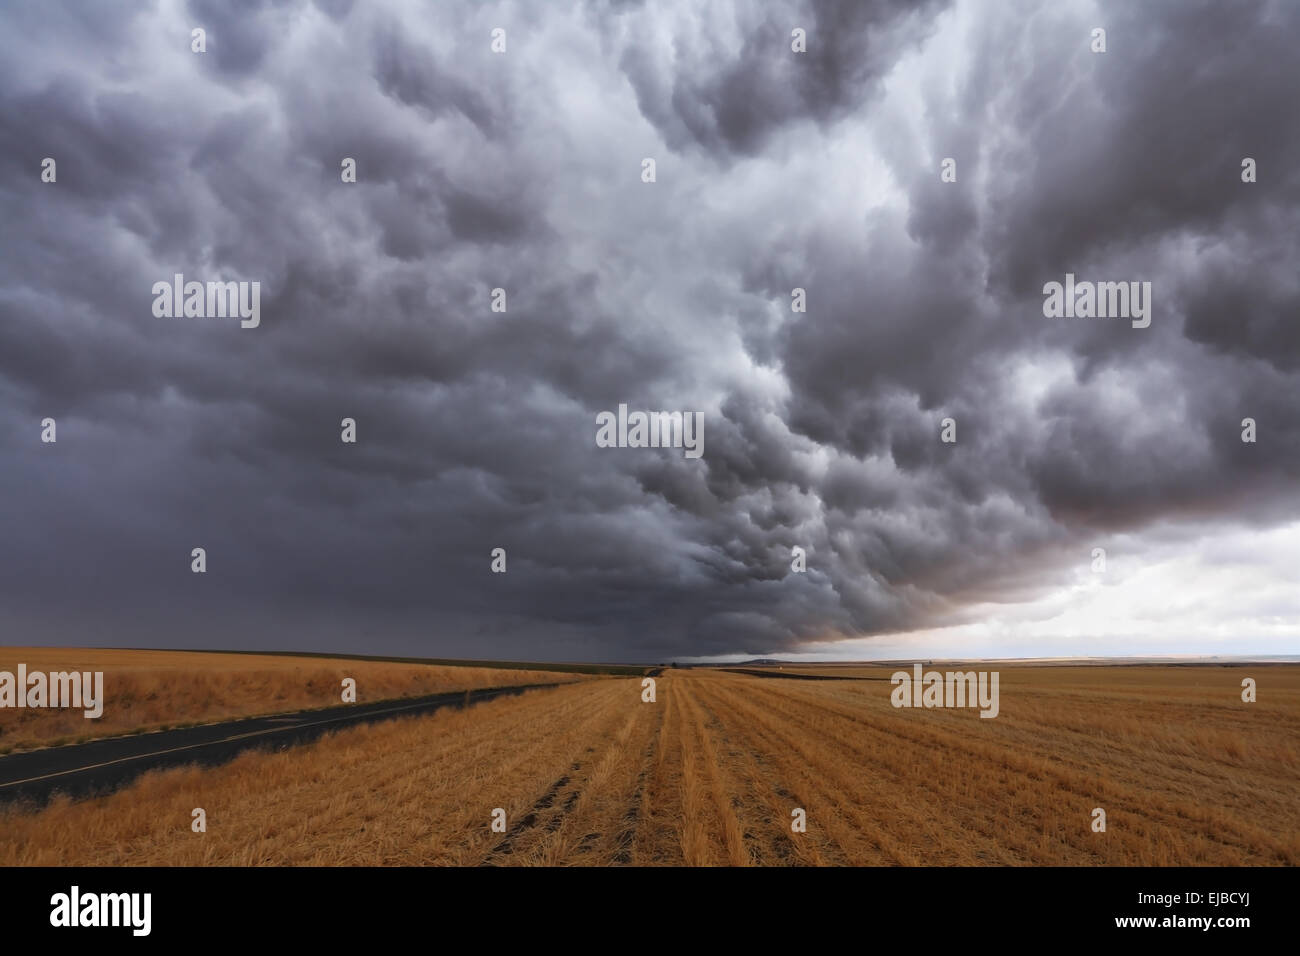 Terrible swirling storm cloud Stock Photo